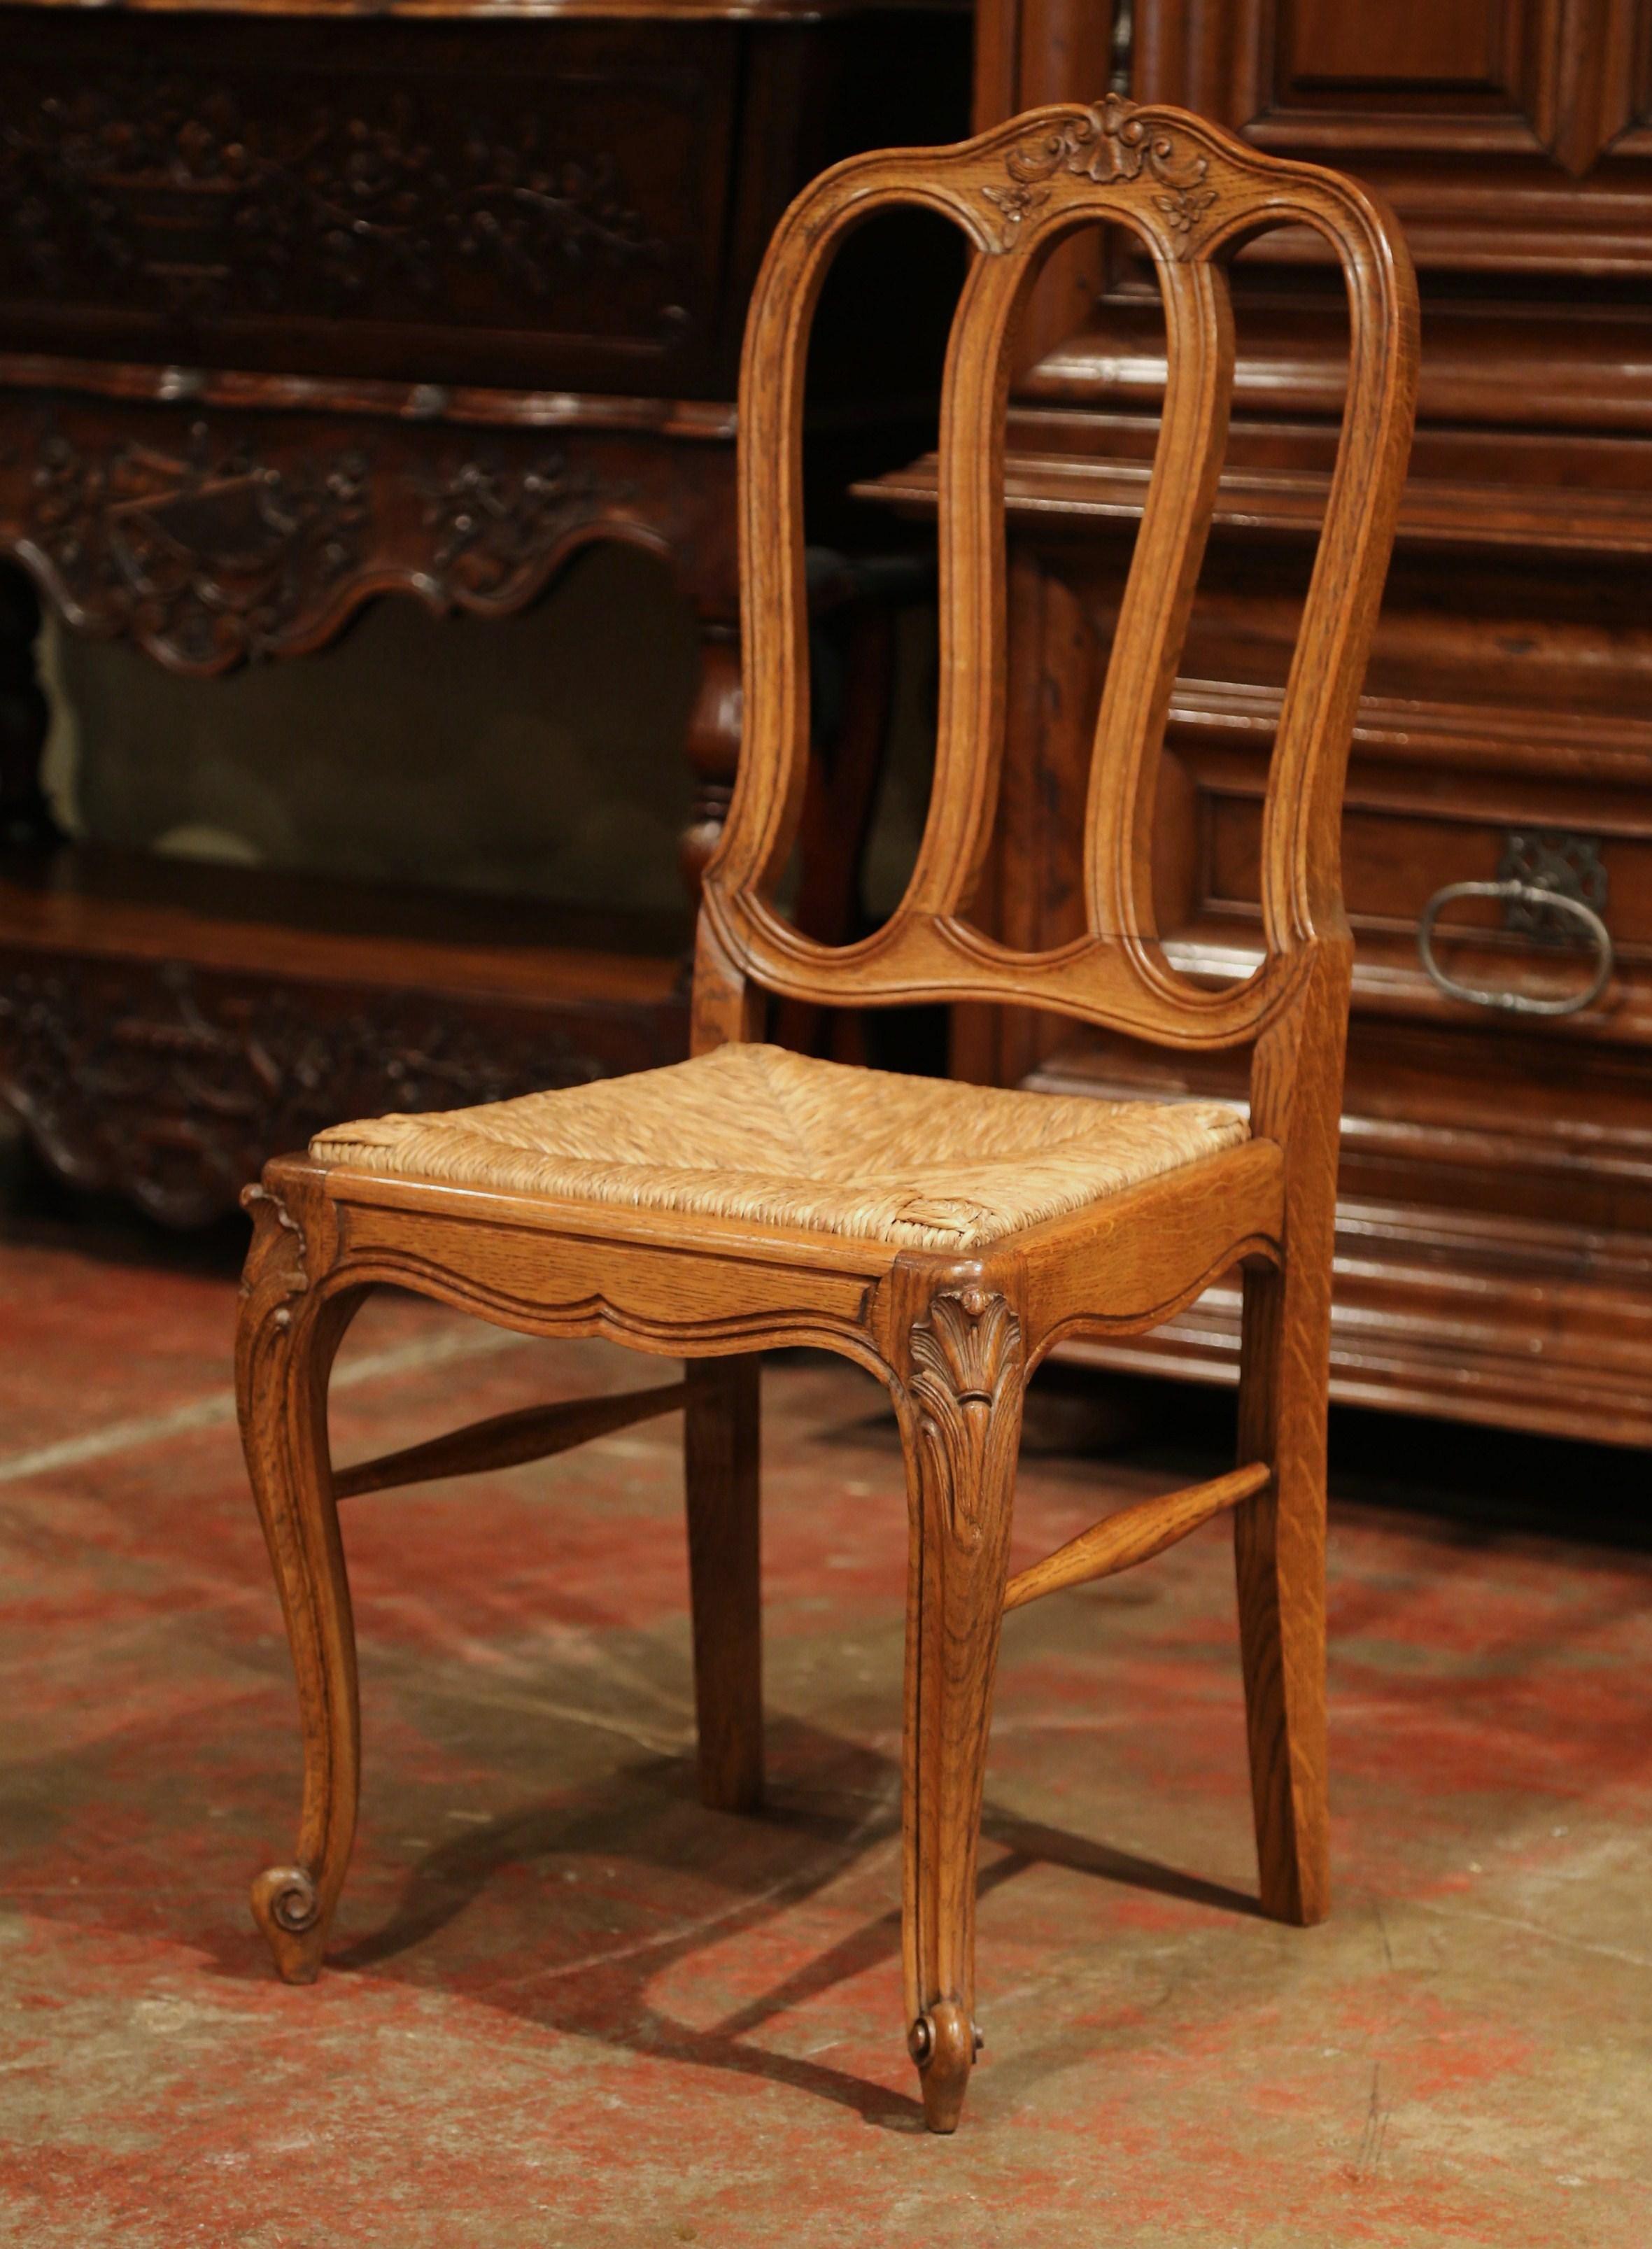 This elegant set of six country chairs was crafted in France, circa 2000. Each chair is made of solid oak and has a tall arched back with four vertical ladders. The chairs are embellished at the pediment with traditional French floral and shell